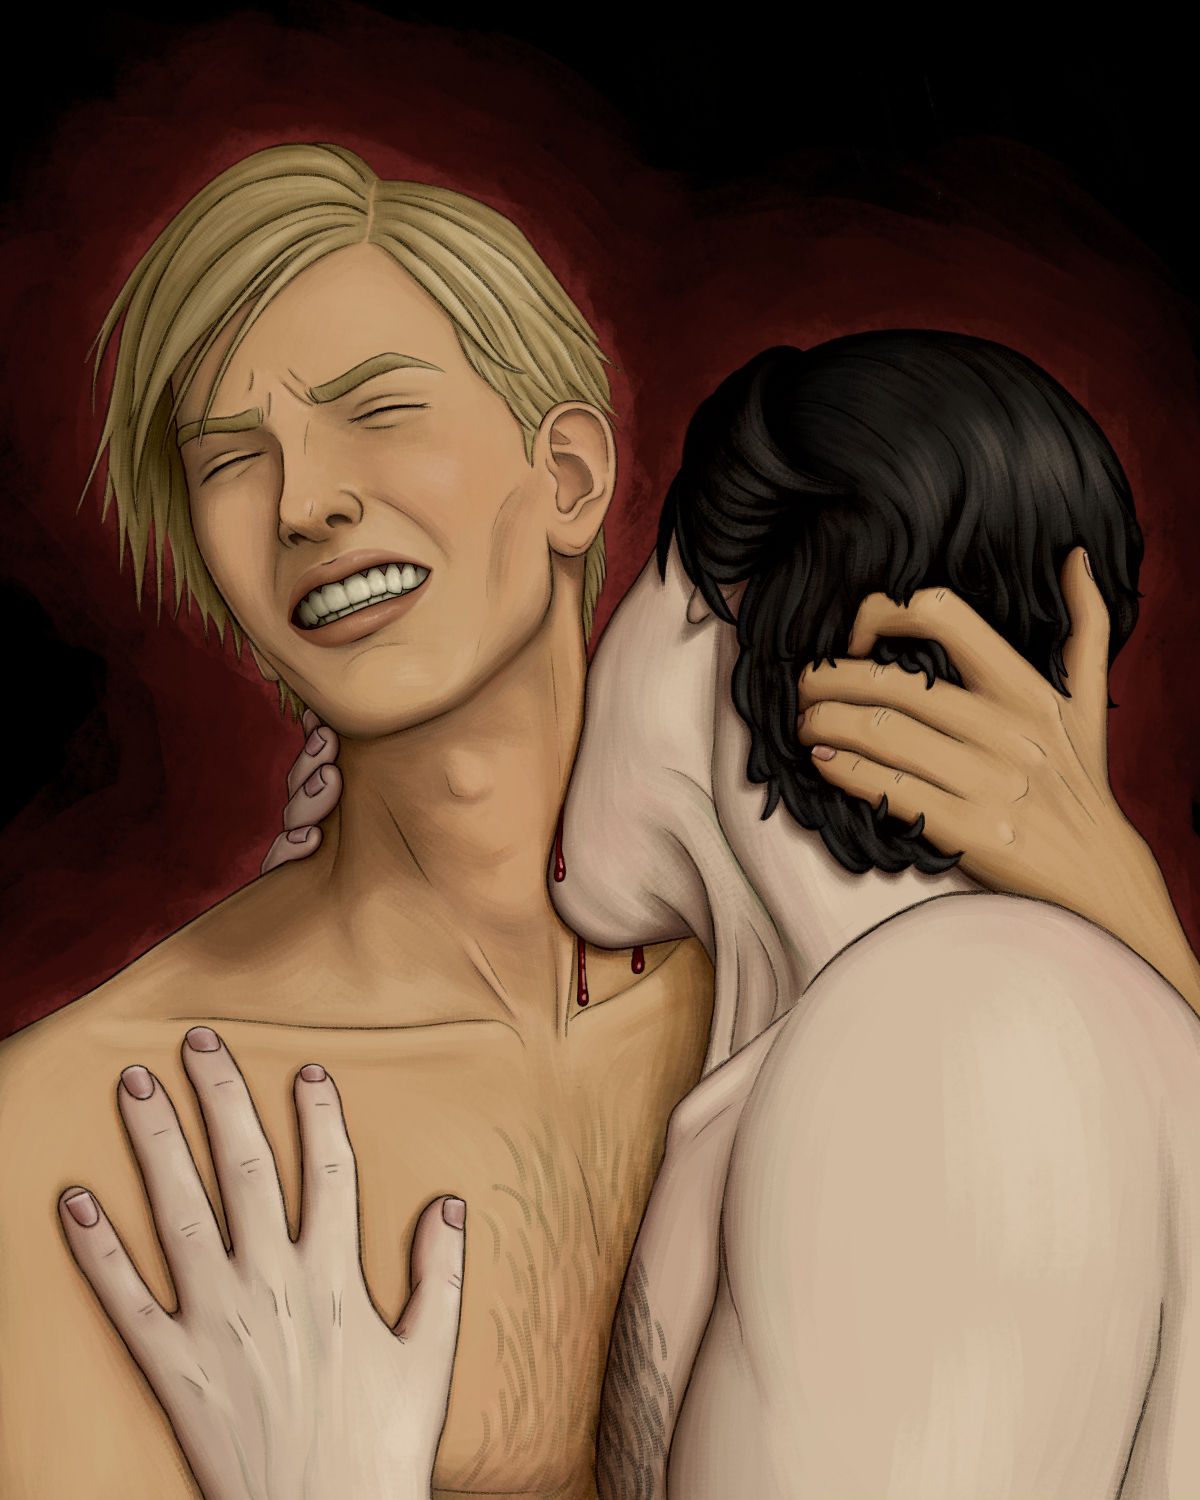 Digital art of a pale dark-haired vampire biting a tan blond man on the neck. The blond man's teeth are bared and eyes are scrunched in pain/pleasure, his hand is around the vampire's neck pulling him closer. The vampire has one hand around the man's neck, the other hand resting on his chest.